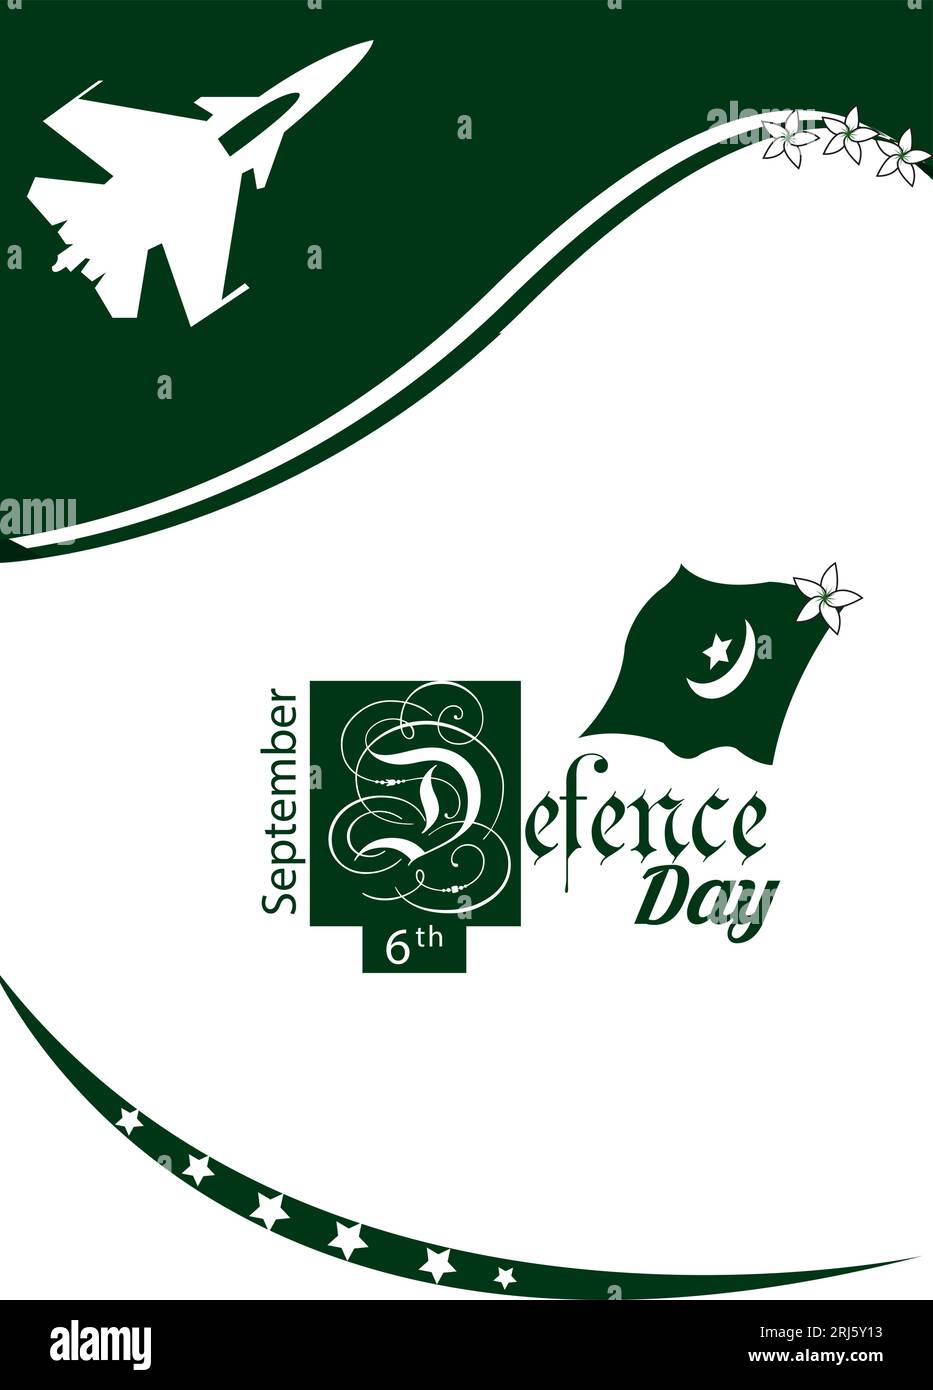 Defence day post Stock Vector